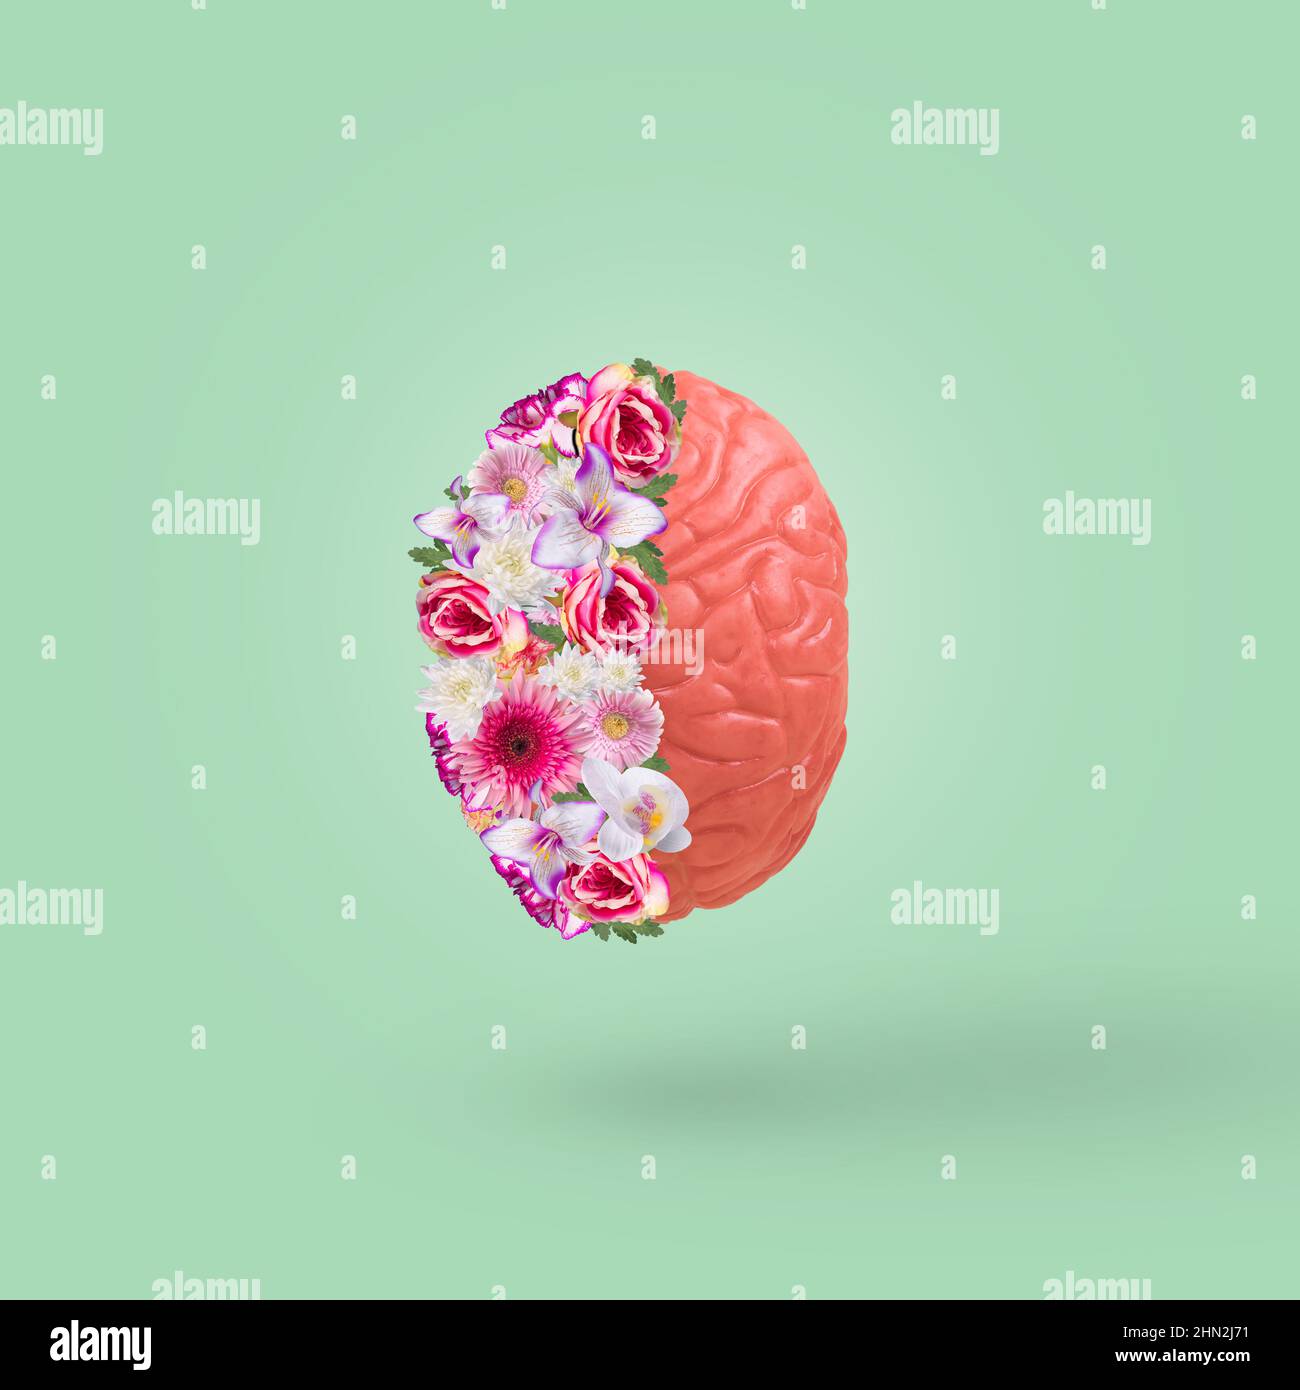 Creative idea with brain and colorful flowers isolated on a pastel green background. Minimal concept of calm, mental health, emotional wellness. Stock Photo